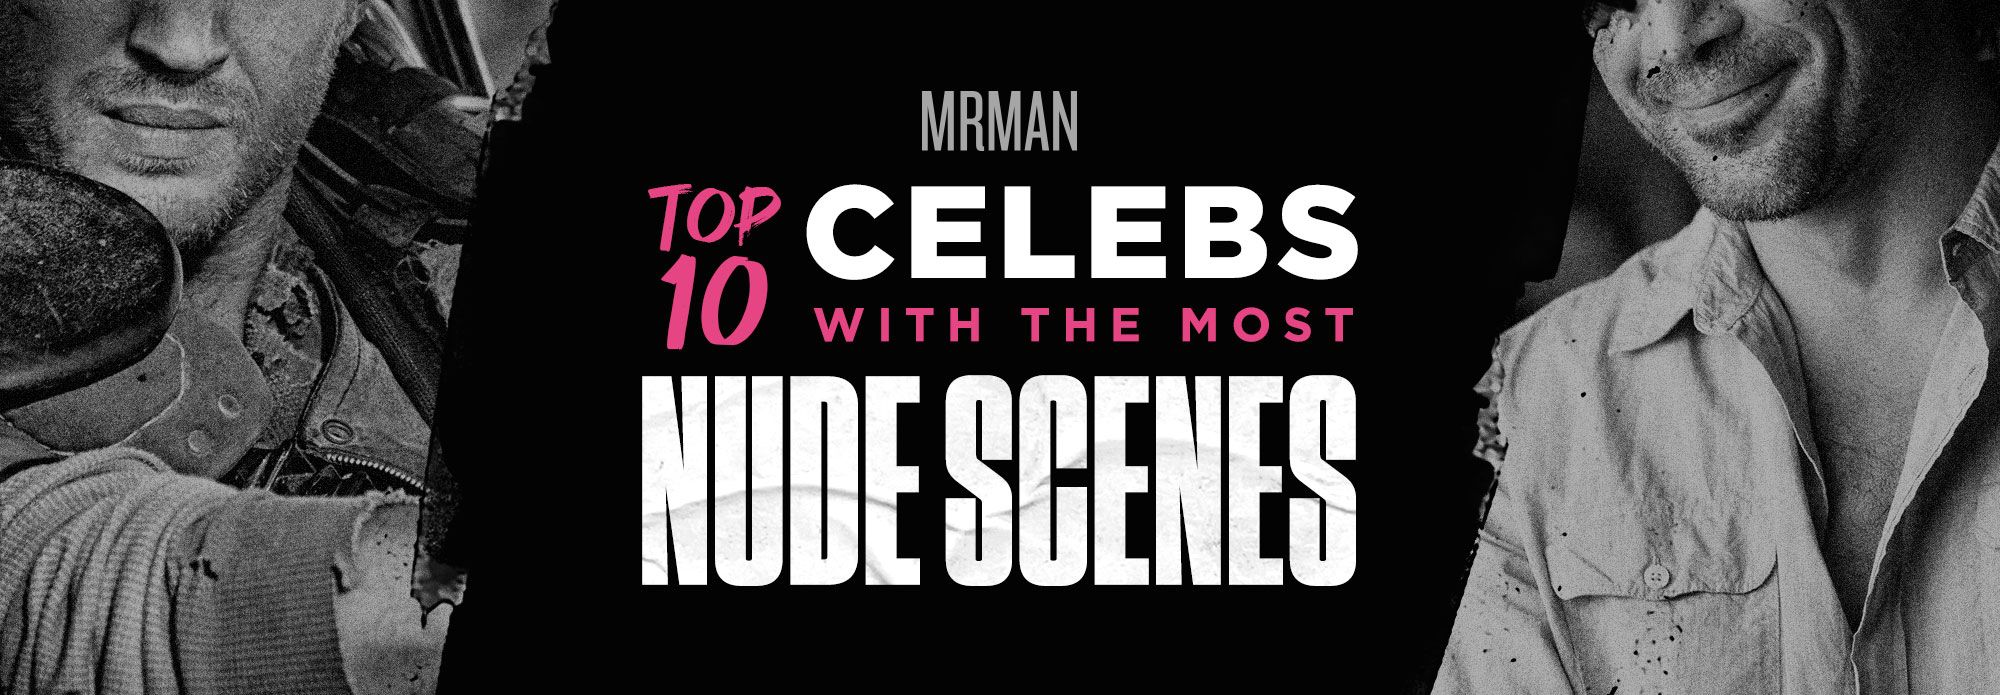 Male Celebs with the Most Nude Scenes